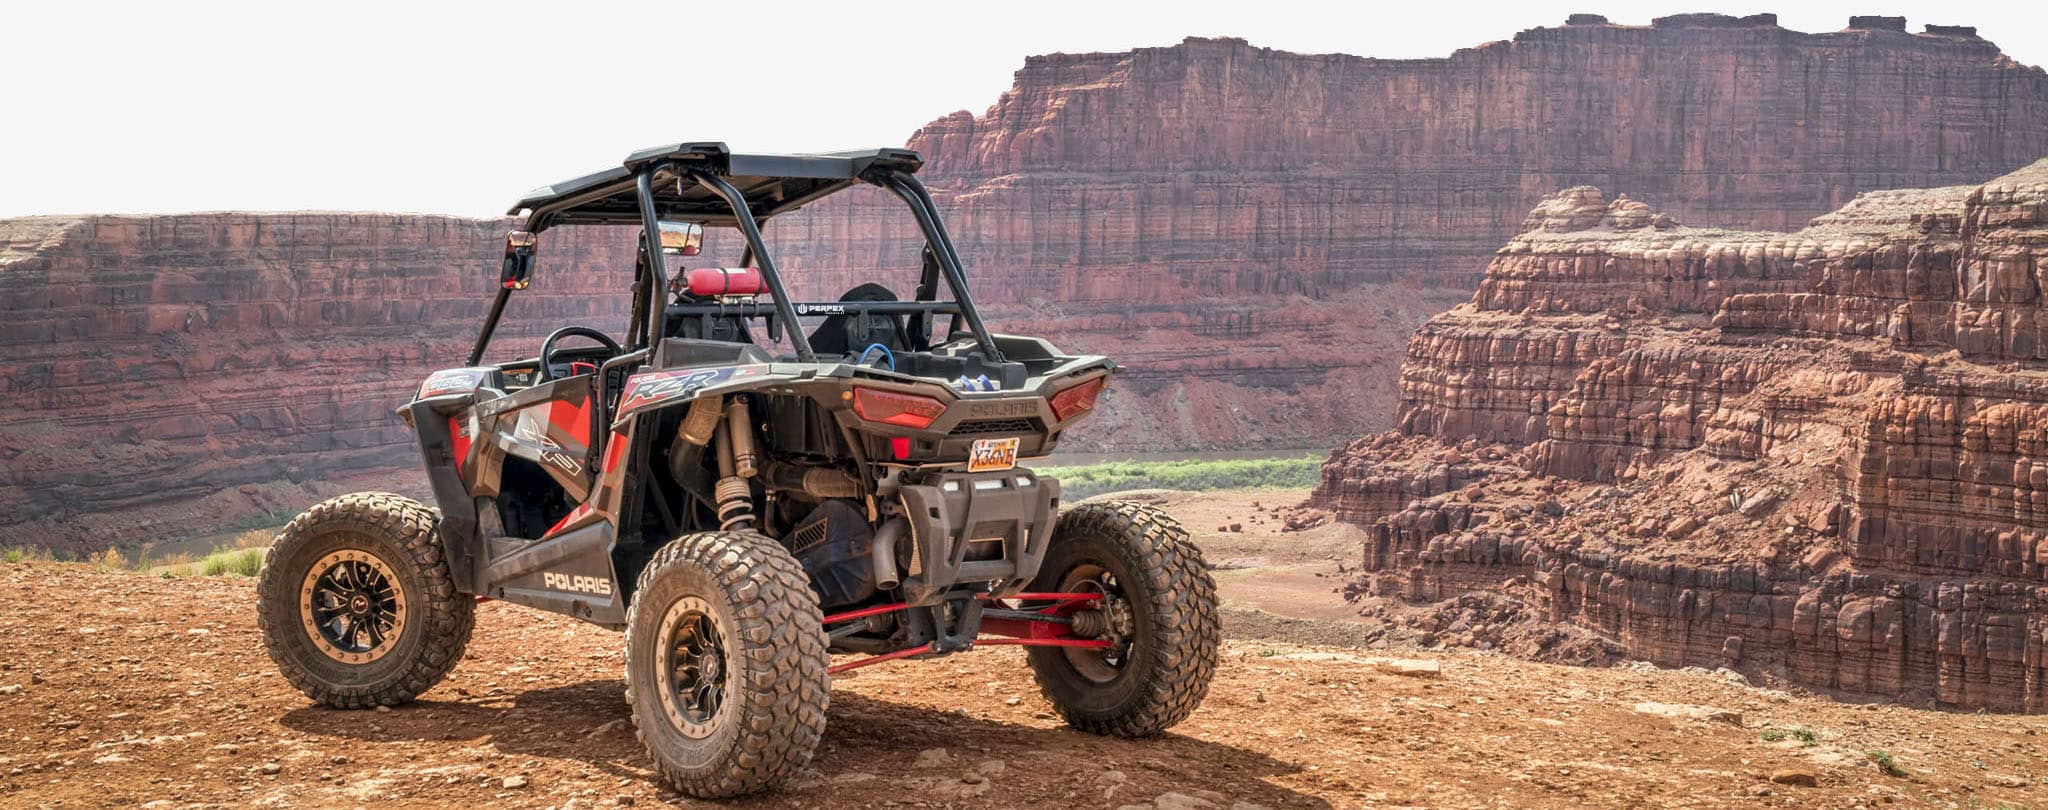 Polaris RZR 1000 XP featured on the Satisfaction Guarantee page of the Perfex website. The UTV is seen atop a mountain.